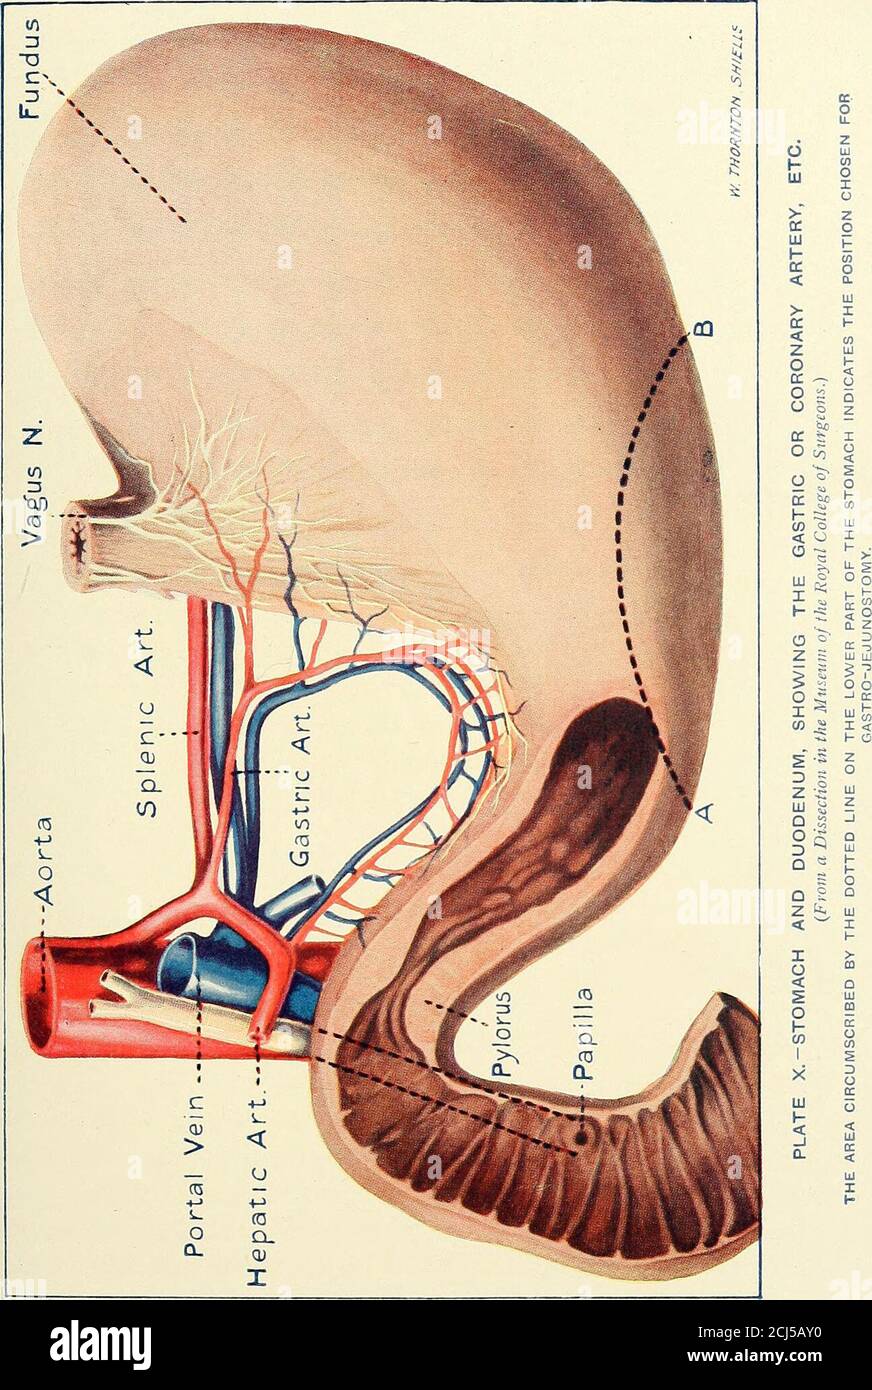 A Manual Of Operative Surgery Terzi S M Fig 49 Position And Relations Of The Stomach And Duodenum Showingalso Their Arterial Supply After Testut S Stomach P Pylorus D